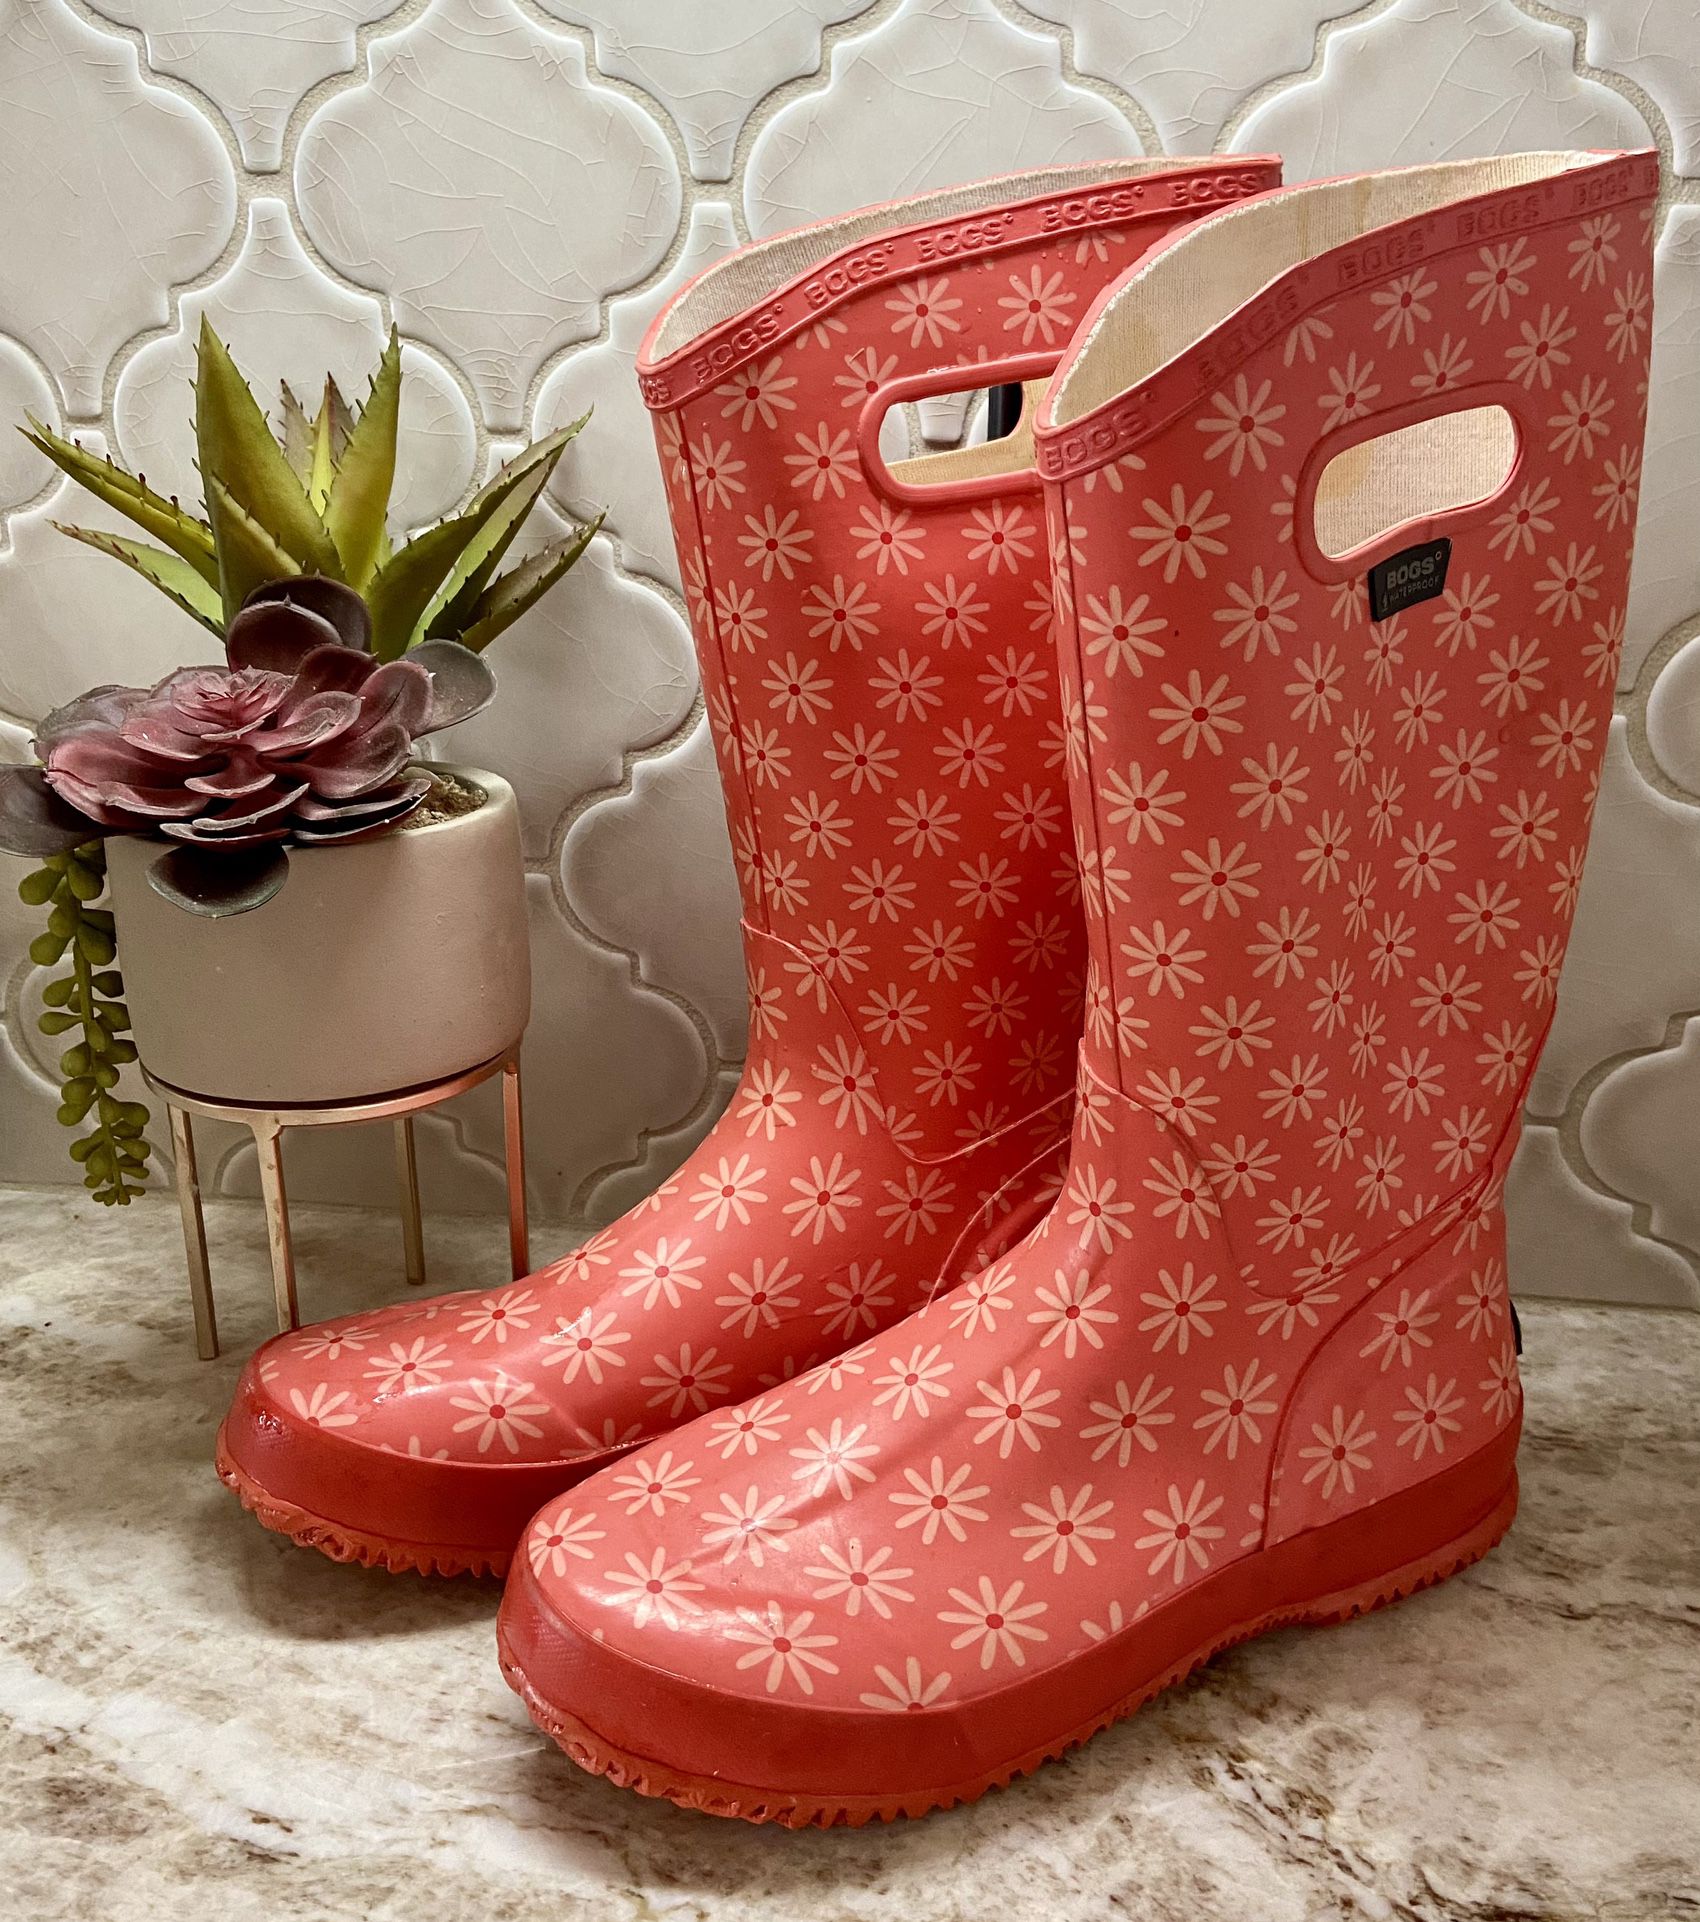 💧WOMENS BOGS RAIN BOOT DAISY - WORN TWICE - EXCELLENT CONDITION - SIZE 10 💧